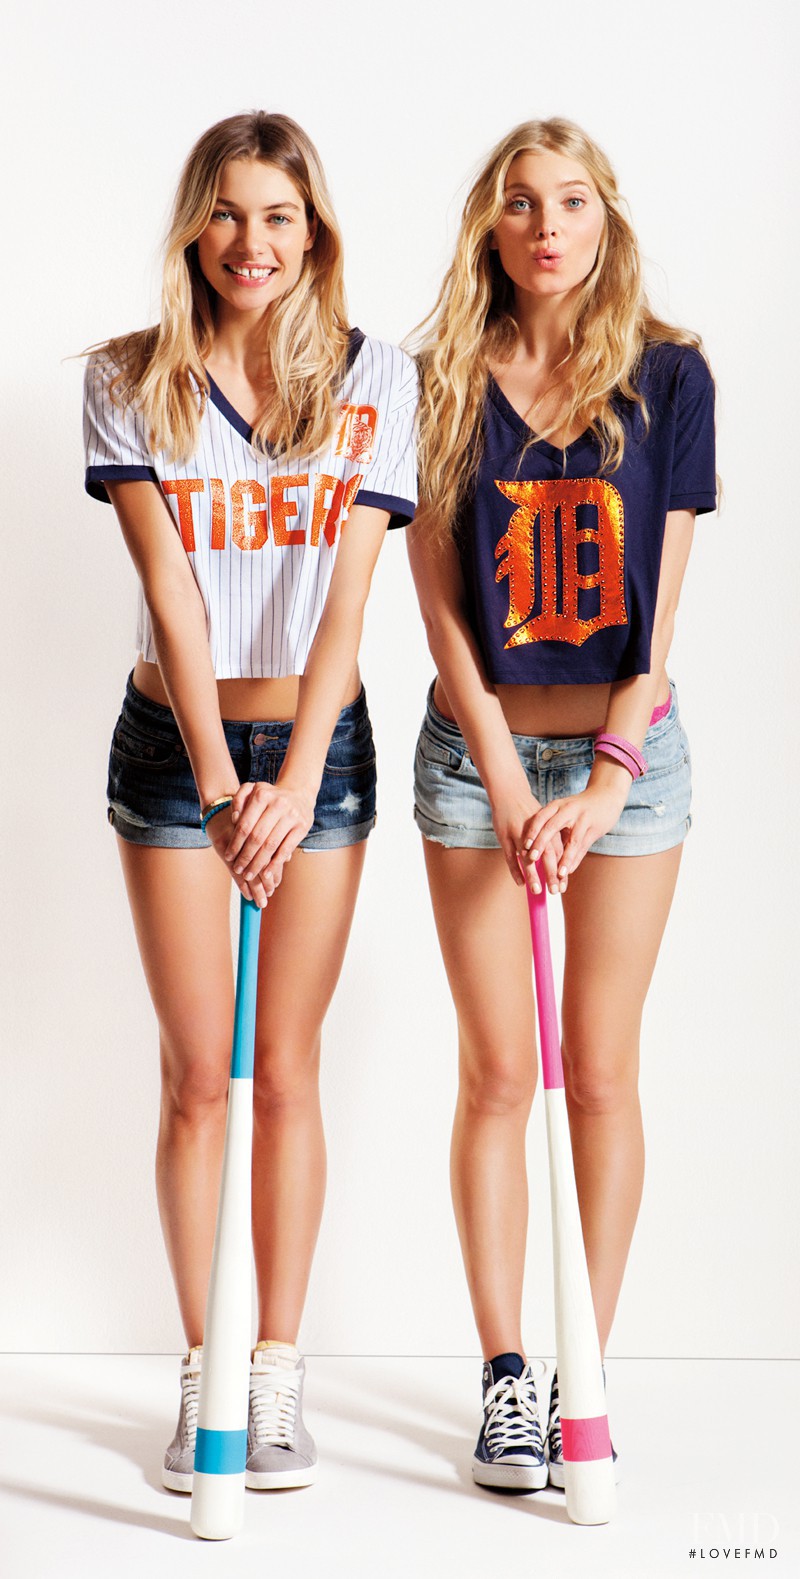 Elsa Hosk featured in  the Victoria\'s Secret PINK Major League Baseball Collection catalogue for Spring/Summer 2012